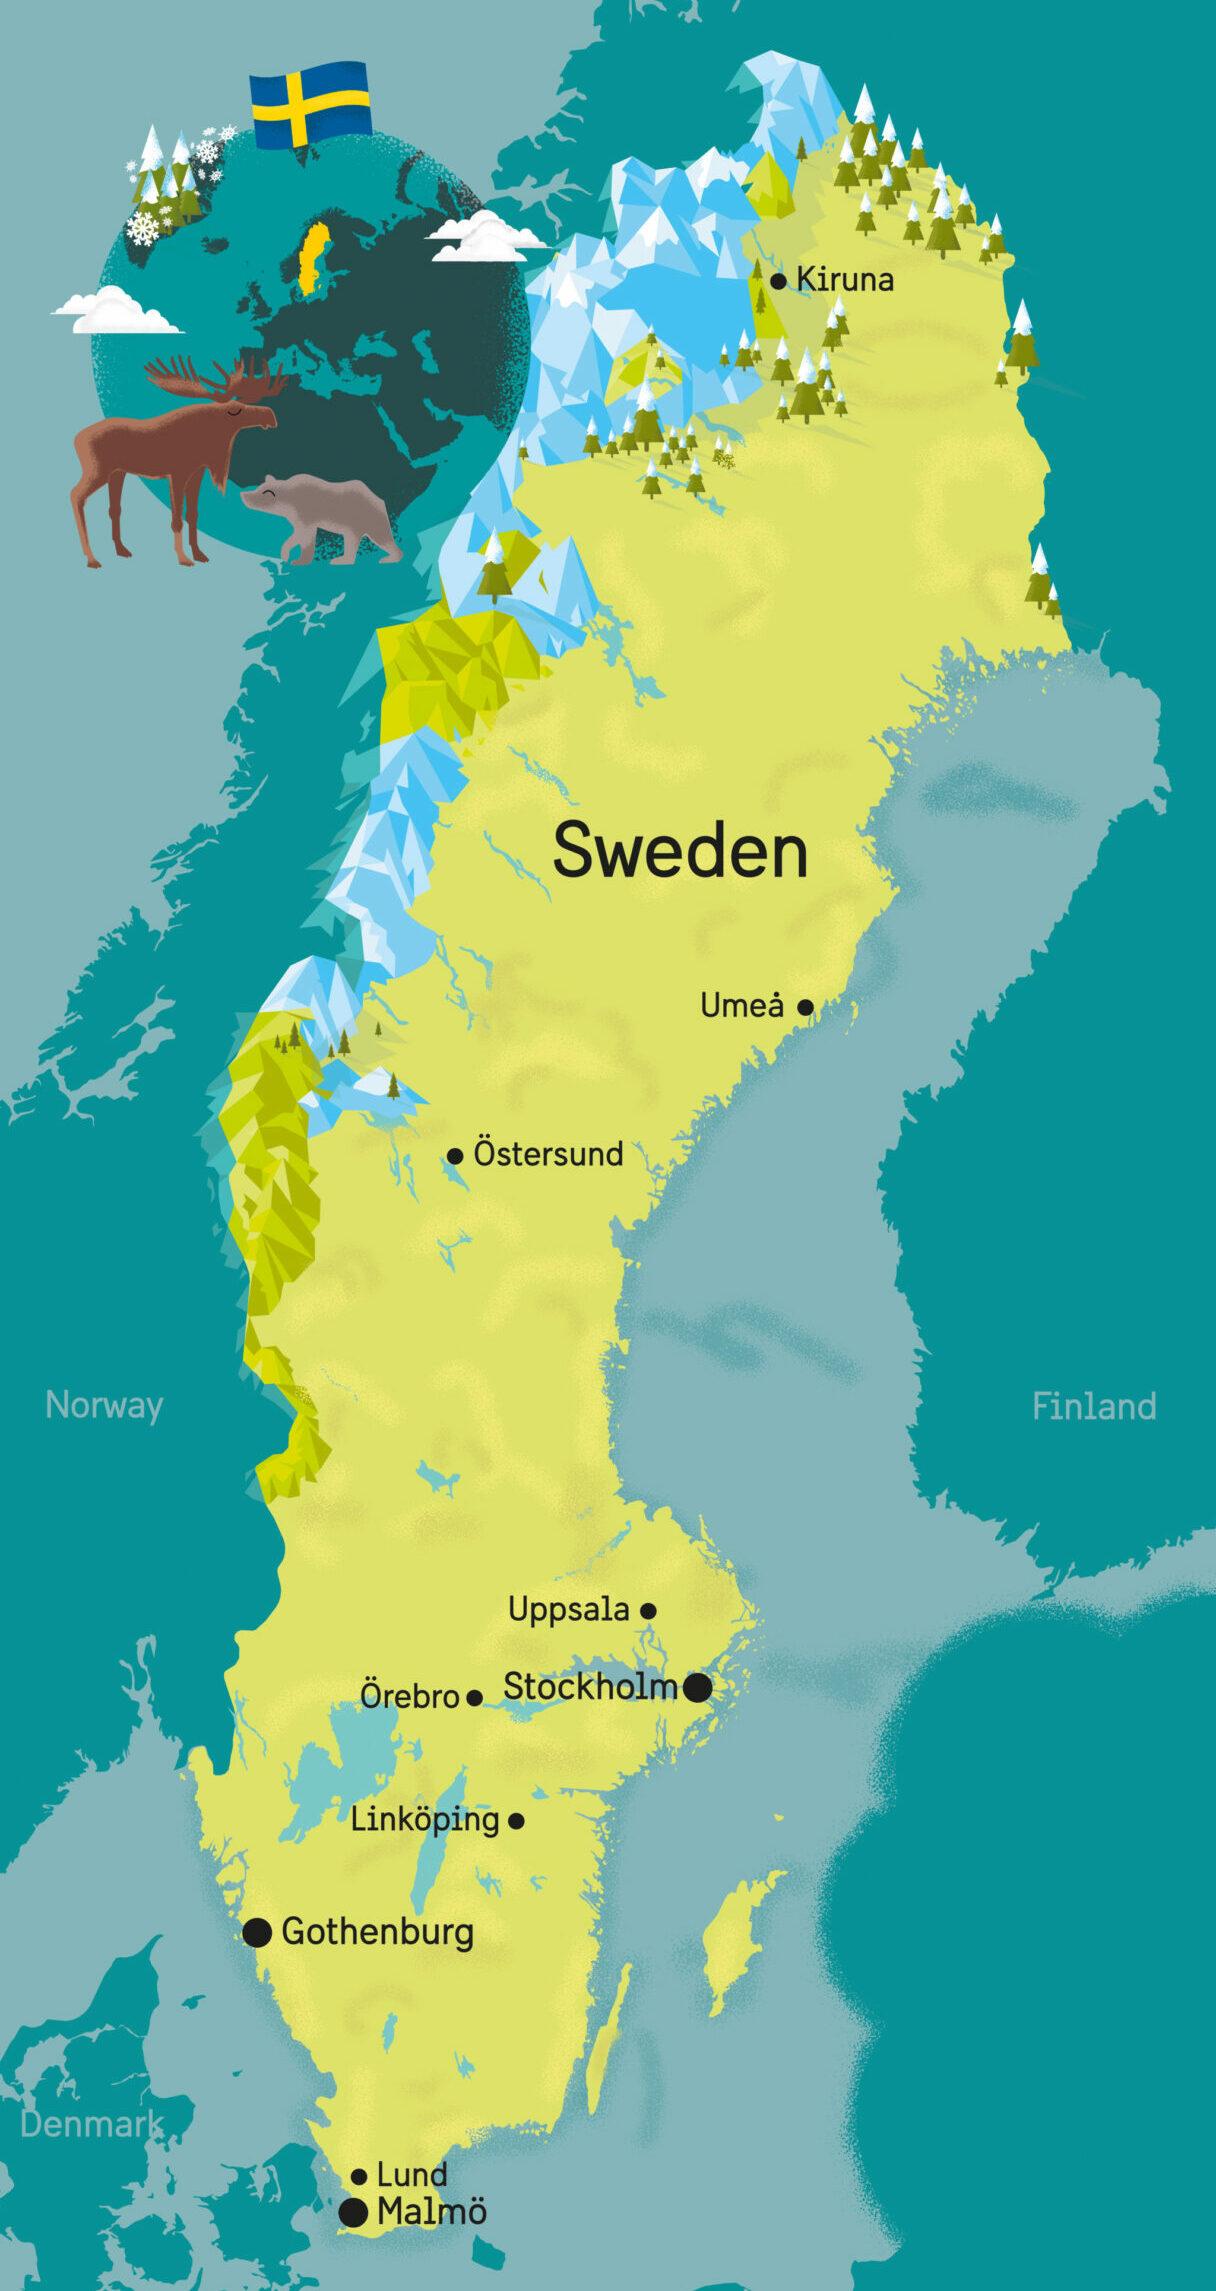 A map of Sweden with ten key cities marked out.